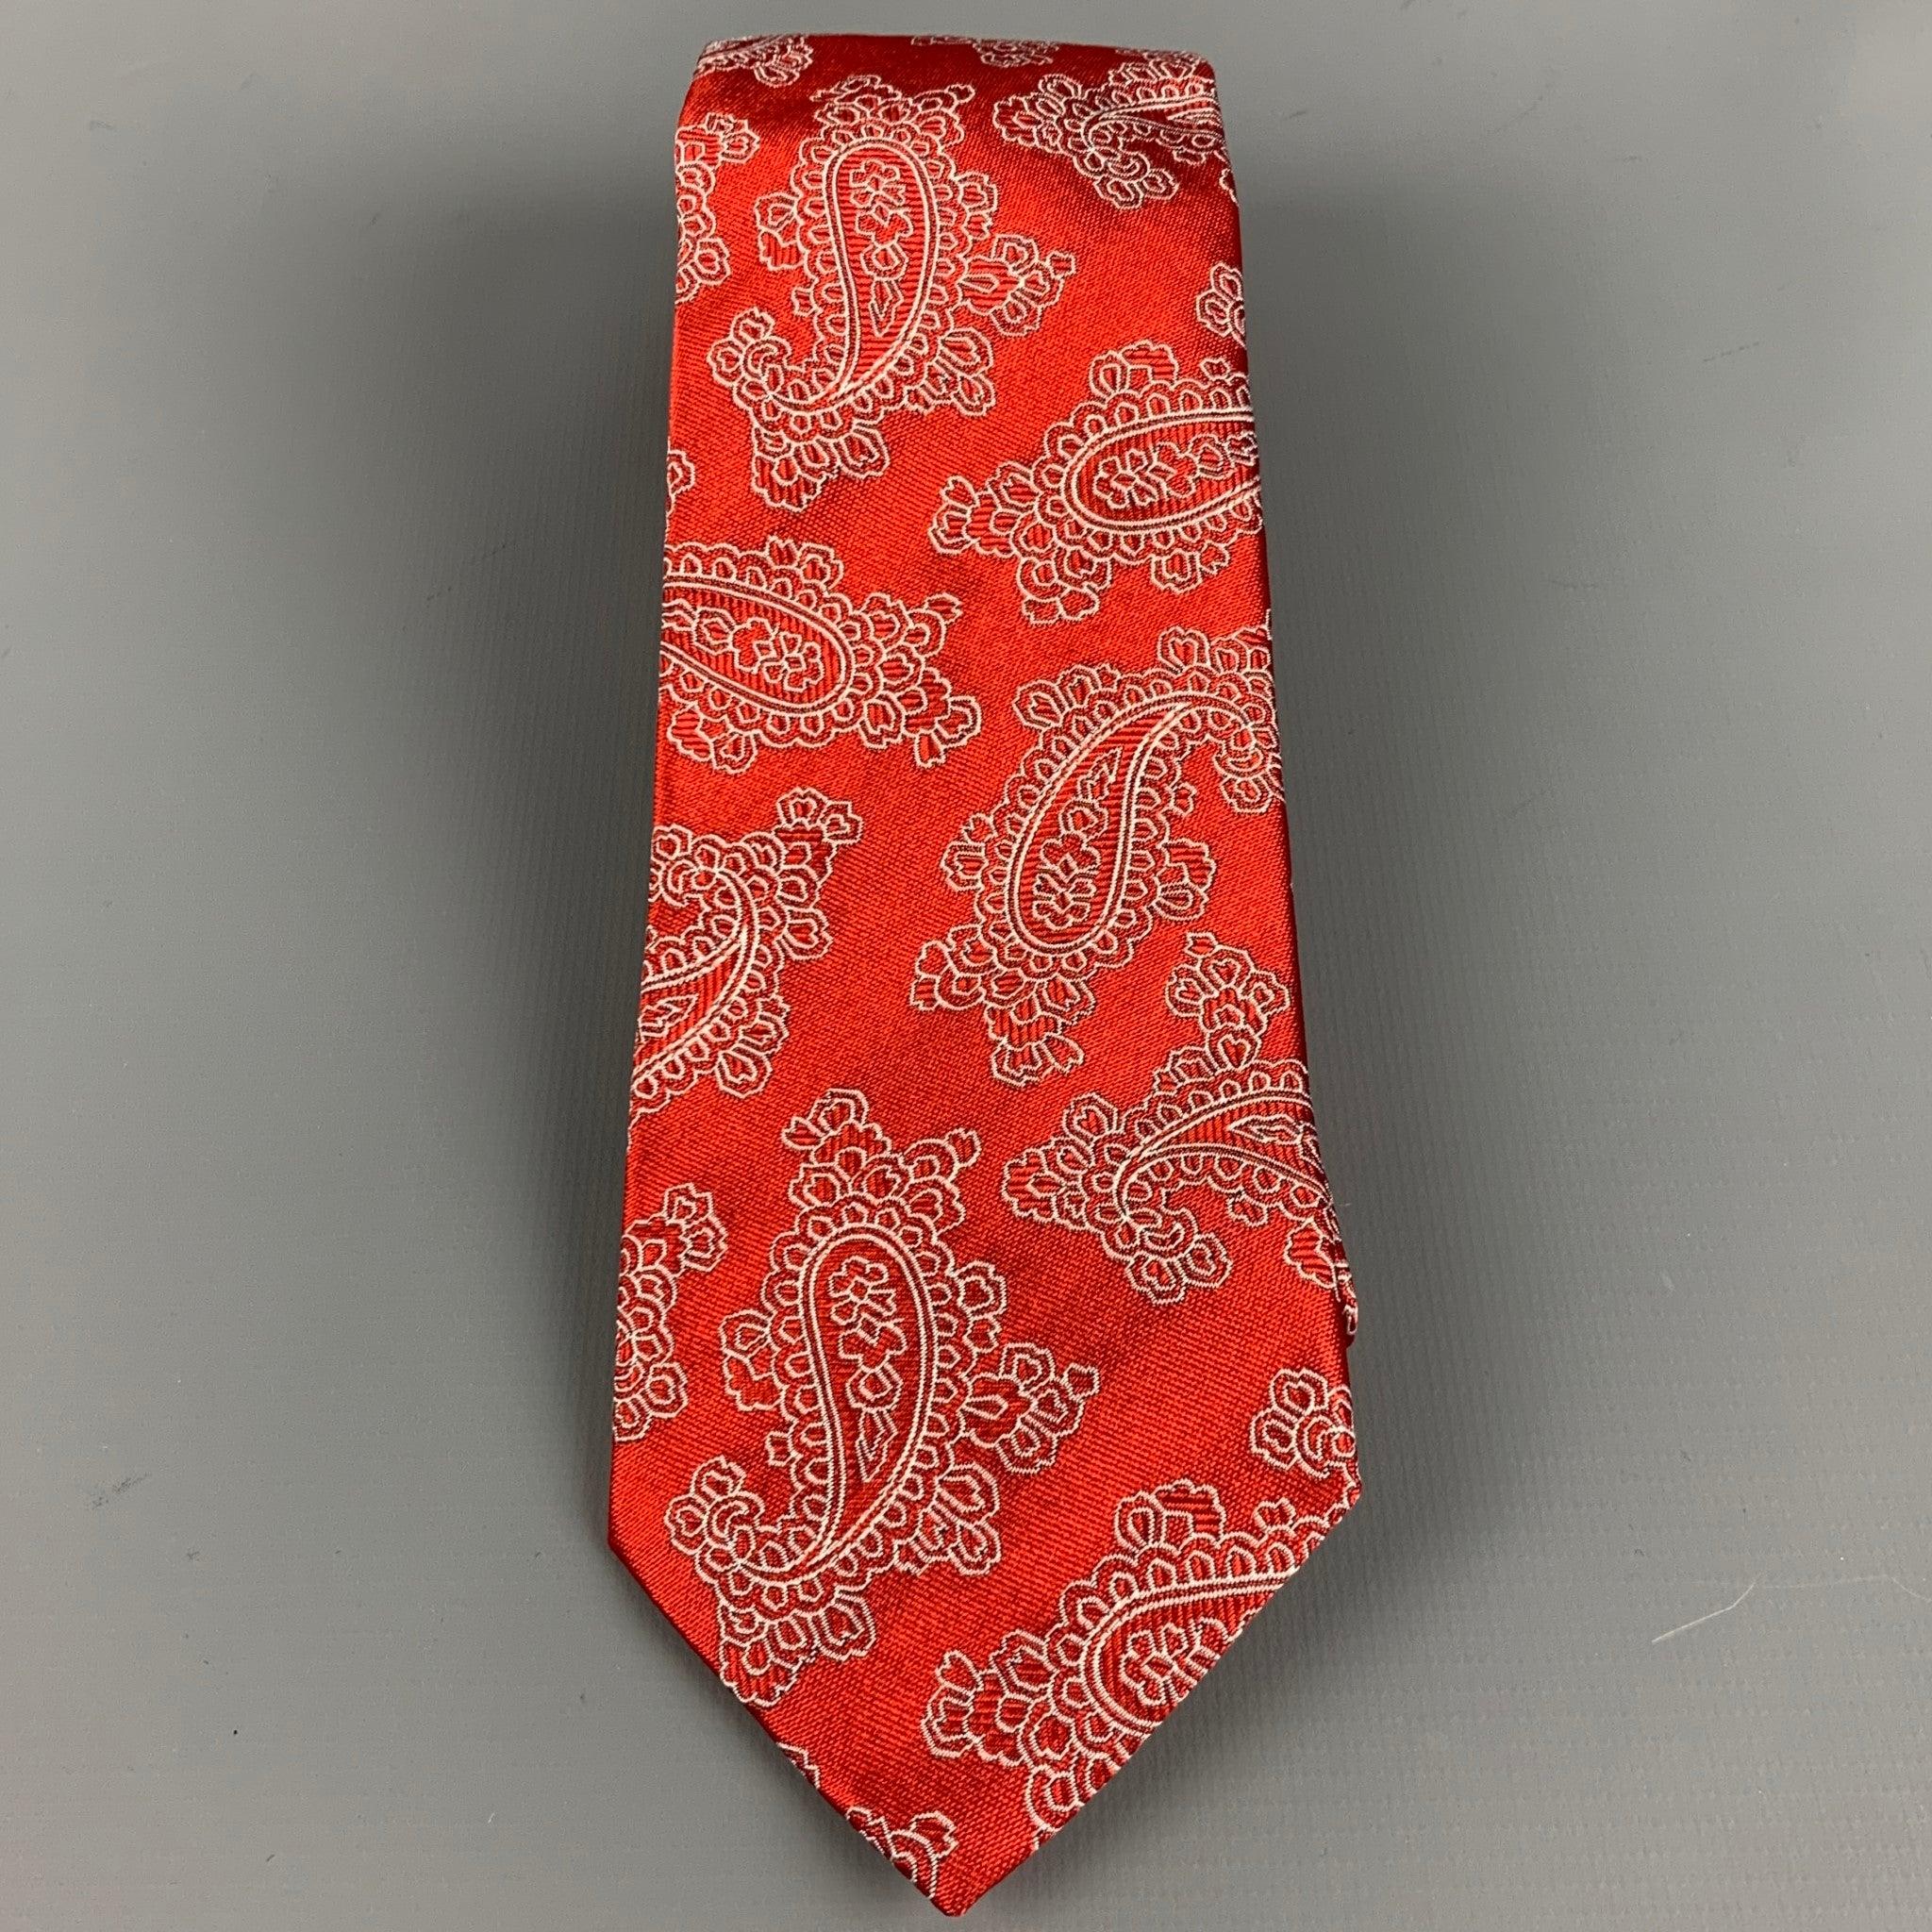 ETRO
necktie in a red silk featuring white jacquard paisley pattern. Made in Italy.Very Good Pre-Owned Condition. Minor marks. 

Measurements: 
  Width: 3 inches Length: 58 inches 
  
  
 
Reference: 127302
Category: Tie
More Details
    
Brand: 